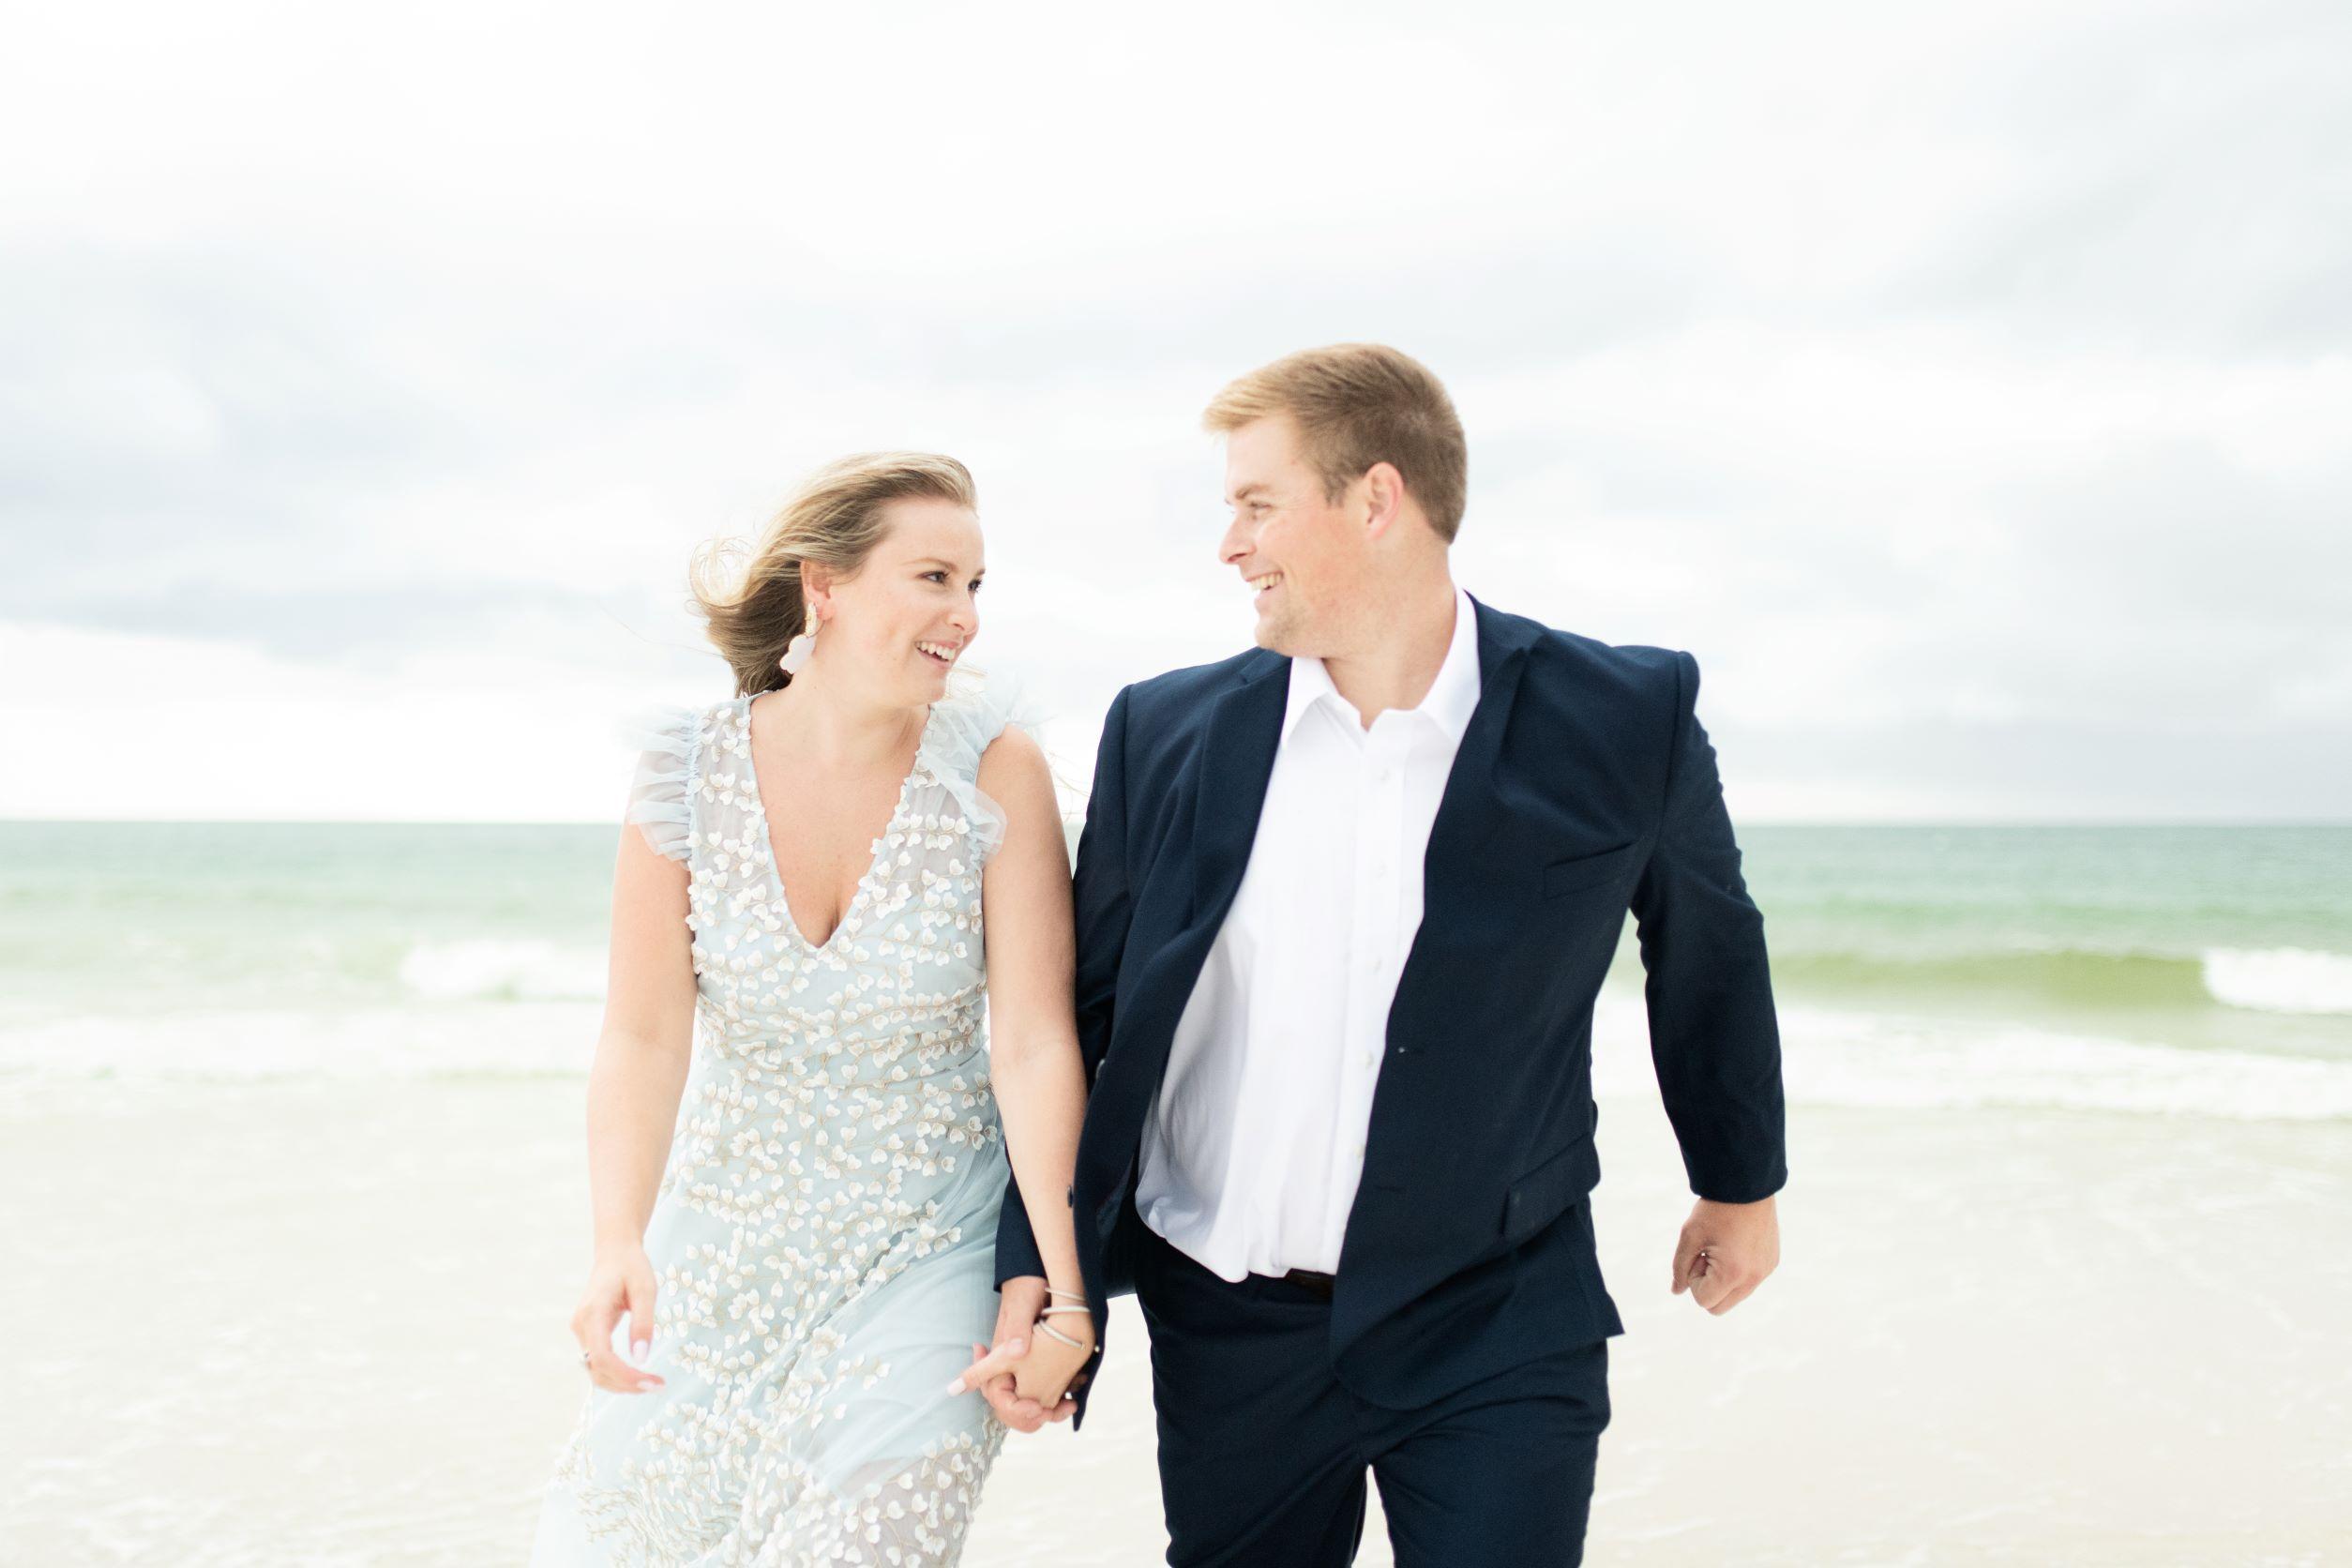 The Wedding Website of Kelsey Hansford and Trent Johns